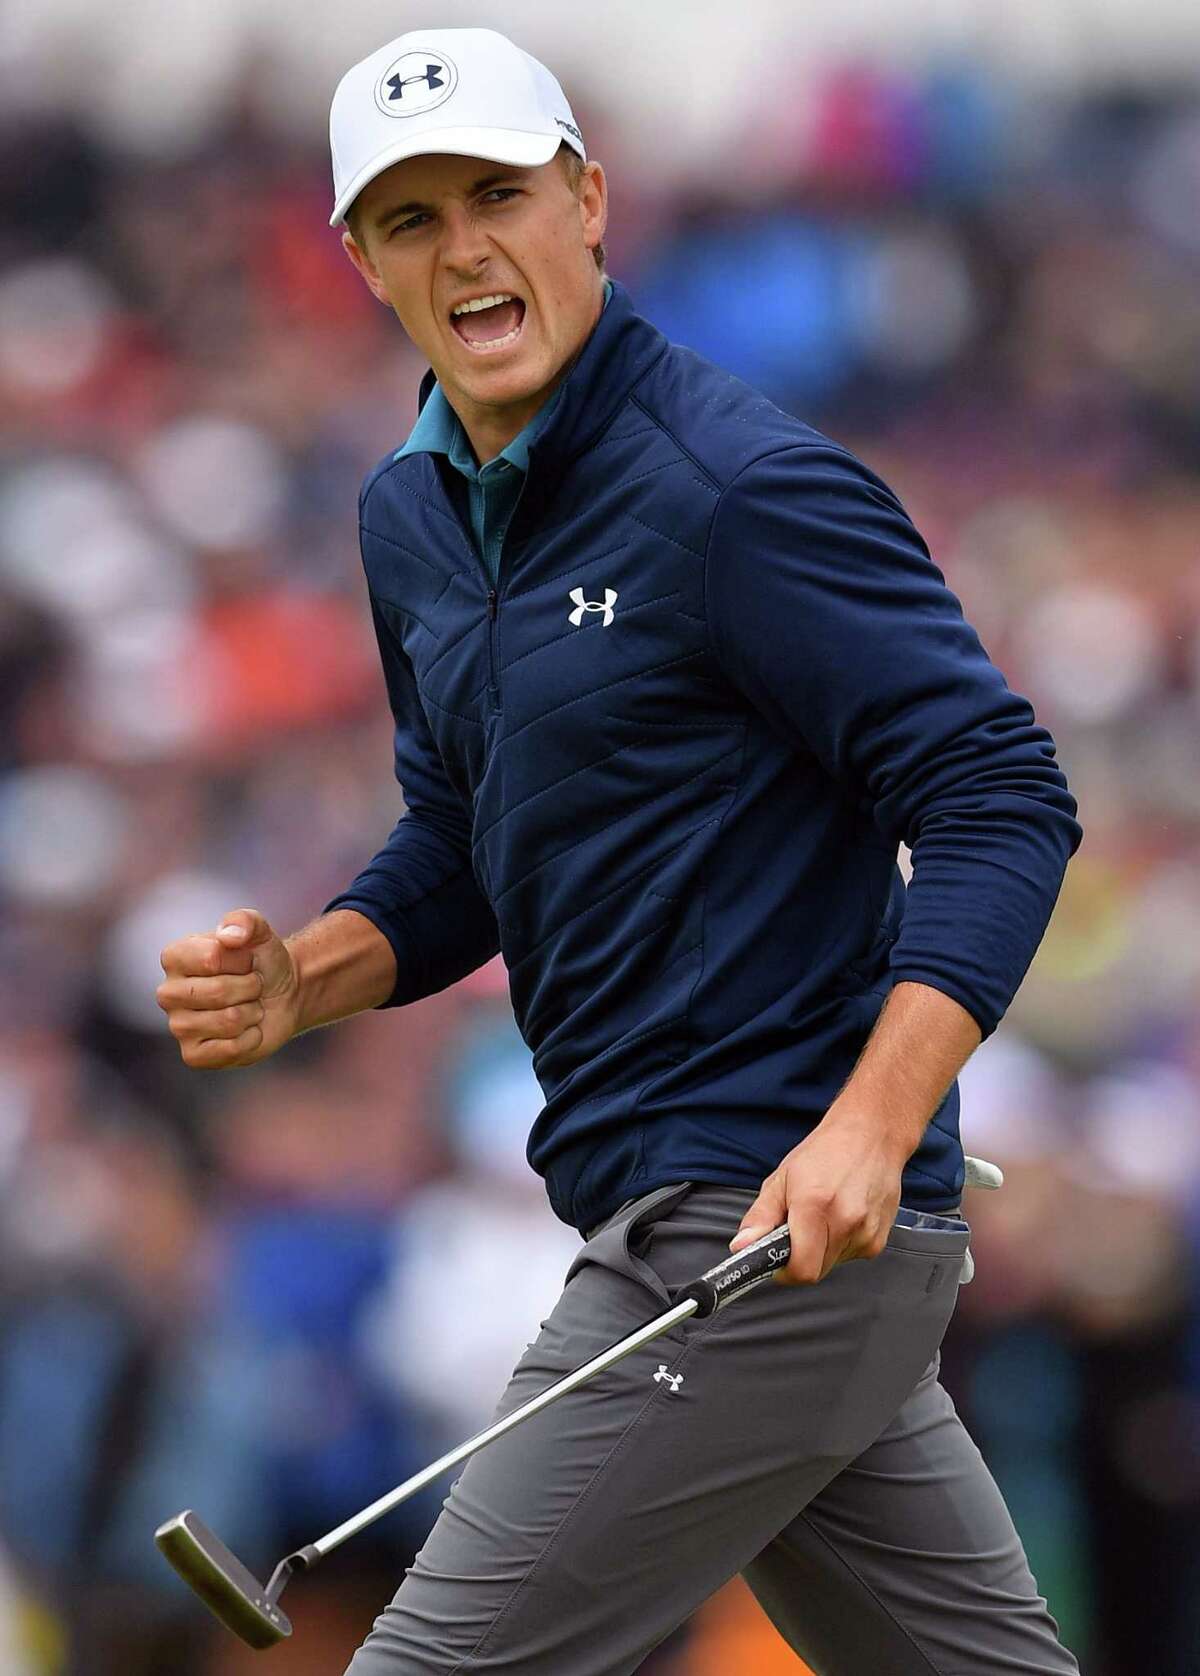 Jordan Spieth gets a charge out of making his 30-foot putt on the 16th green for birdie during the final round at Royal Birkdale.